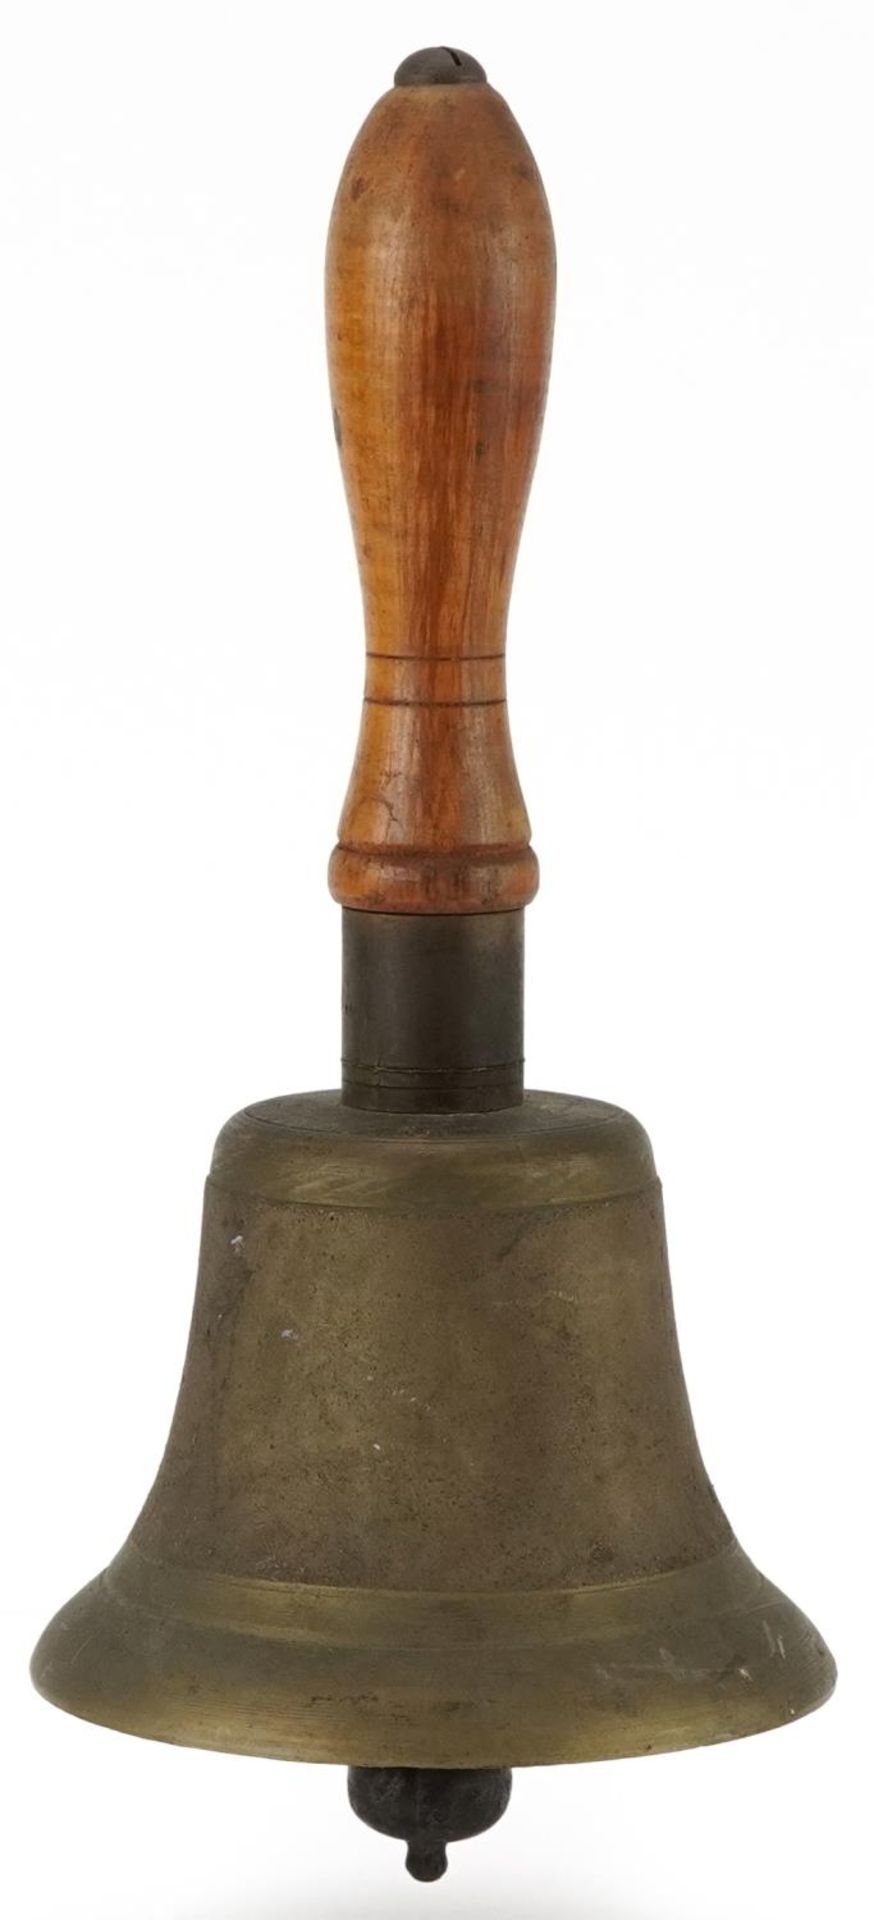 British military ARP Civil Defence bell with turned wooden handle, 26.5cm high - Image 2 of 5